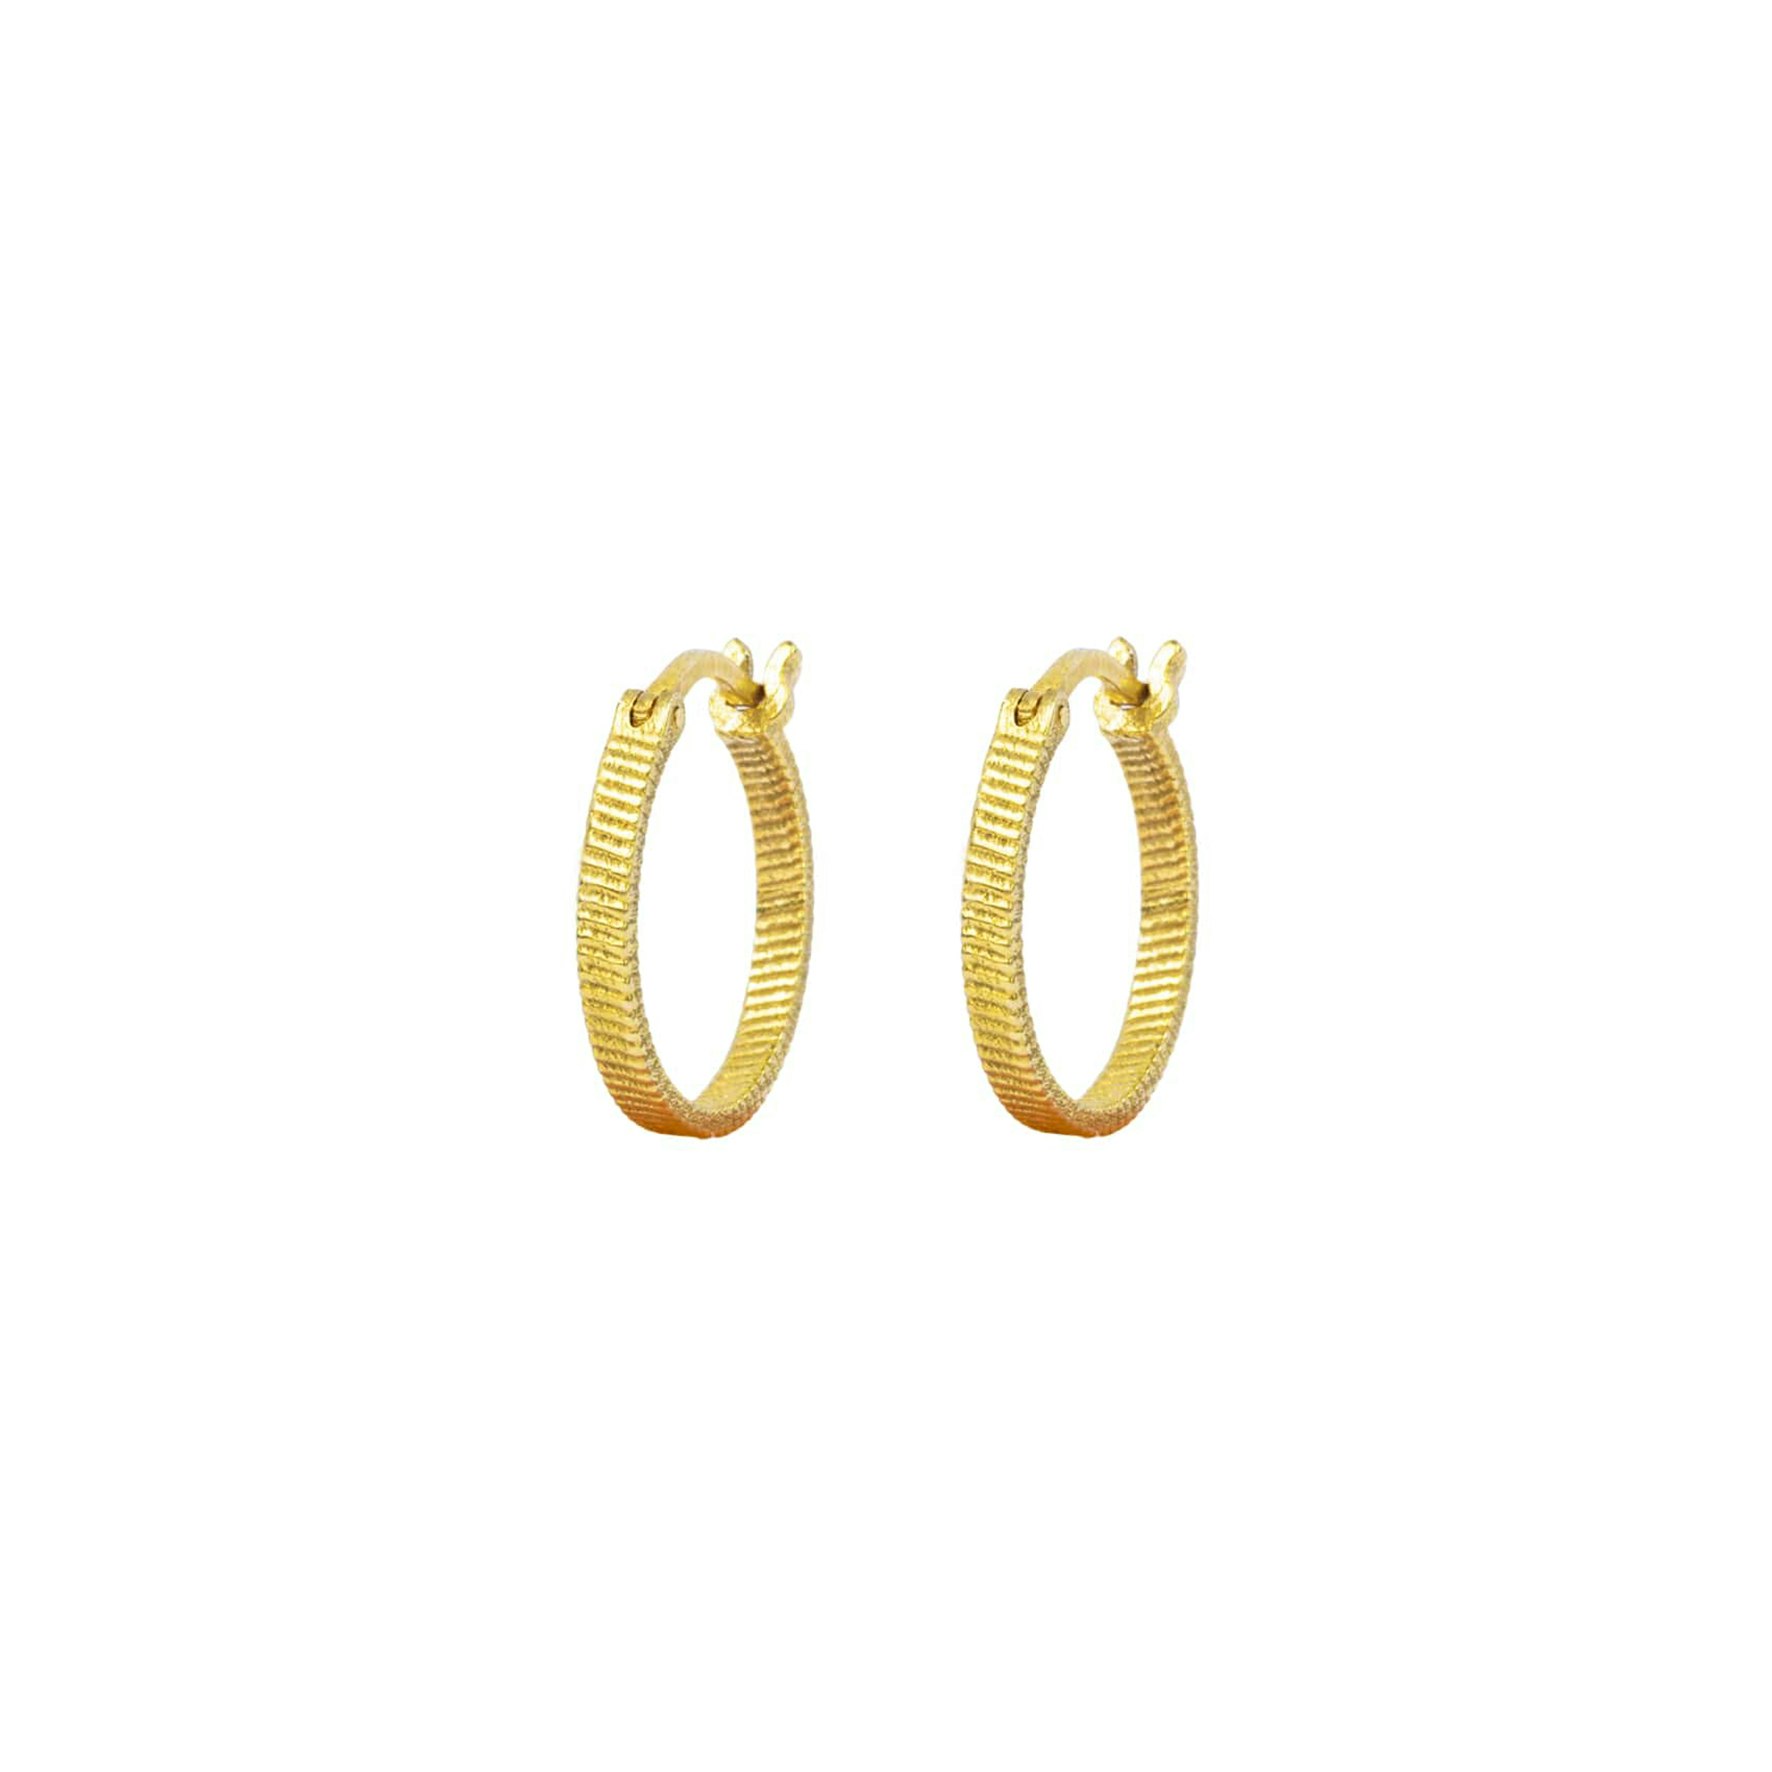 Fortune Teller Hoops Medium from House Of Vincent in Goldplated Silver Sterling 925